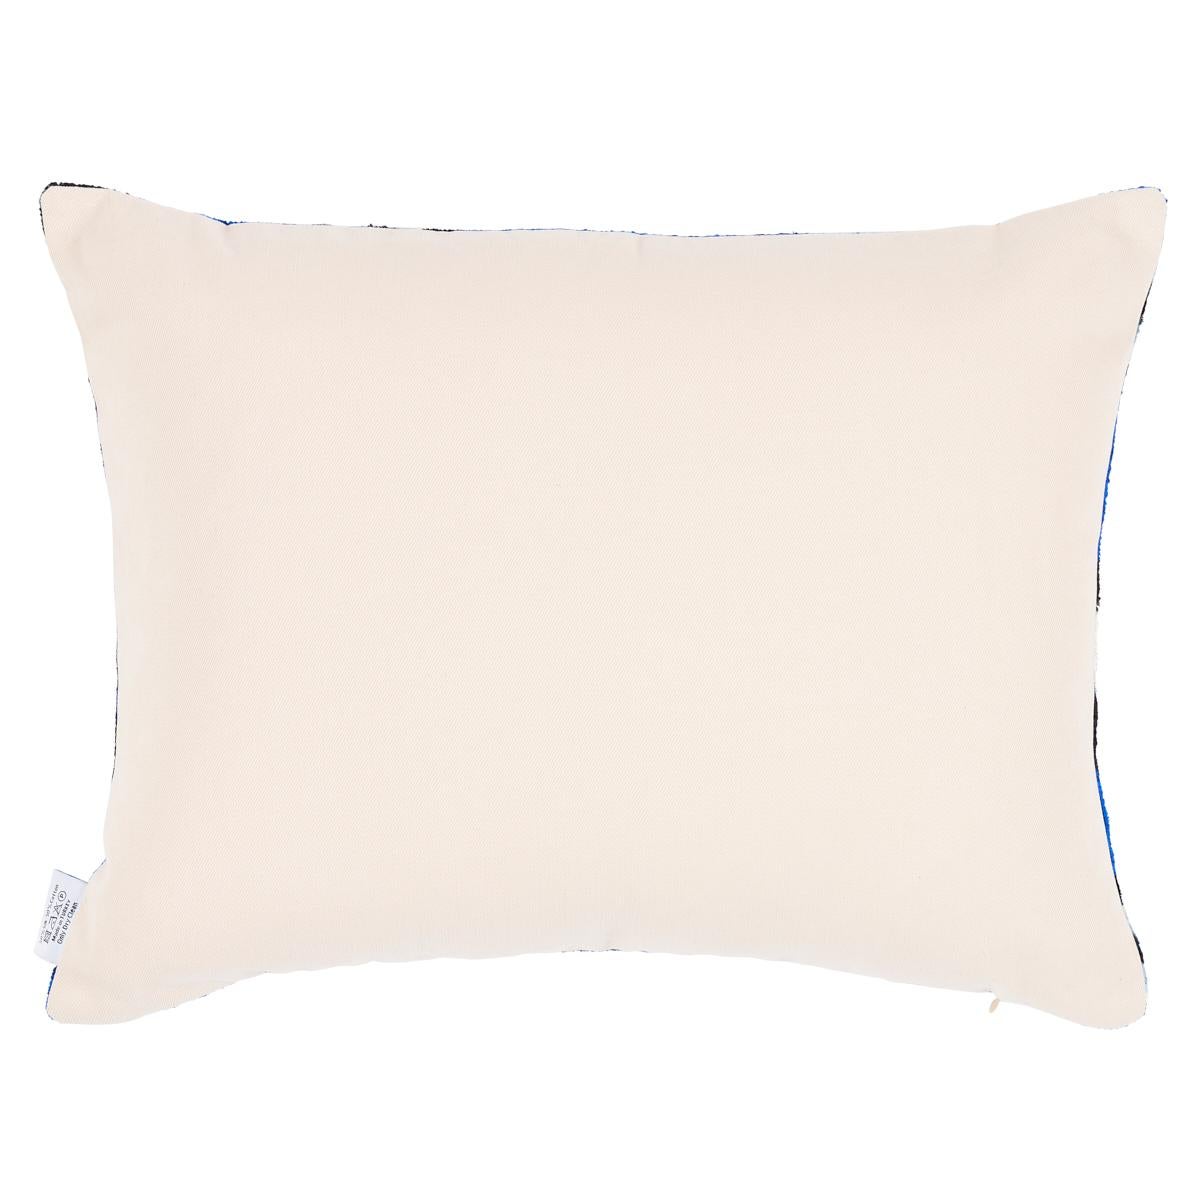 The Bodrum Silk Velvet Pillow by Les Ottomans features handwoven fabric with a knife edge finish. Les Ottomans pillows are handmade in Istanbul, juxtaposing the traditional patterns of Turkey with a wide range of contemporary colors, designs and